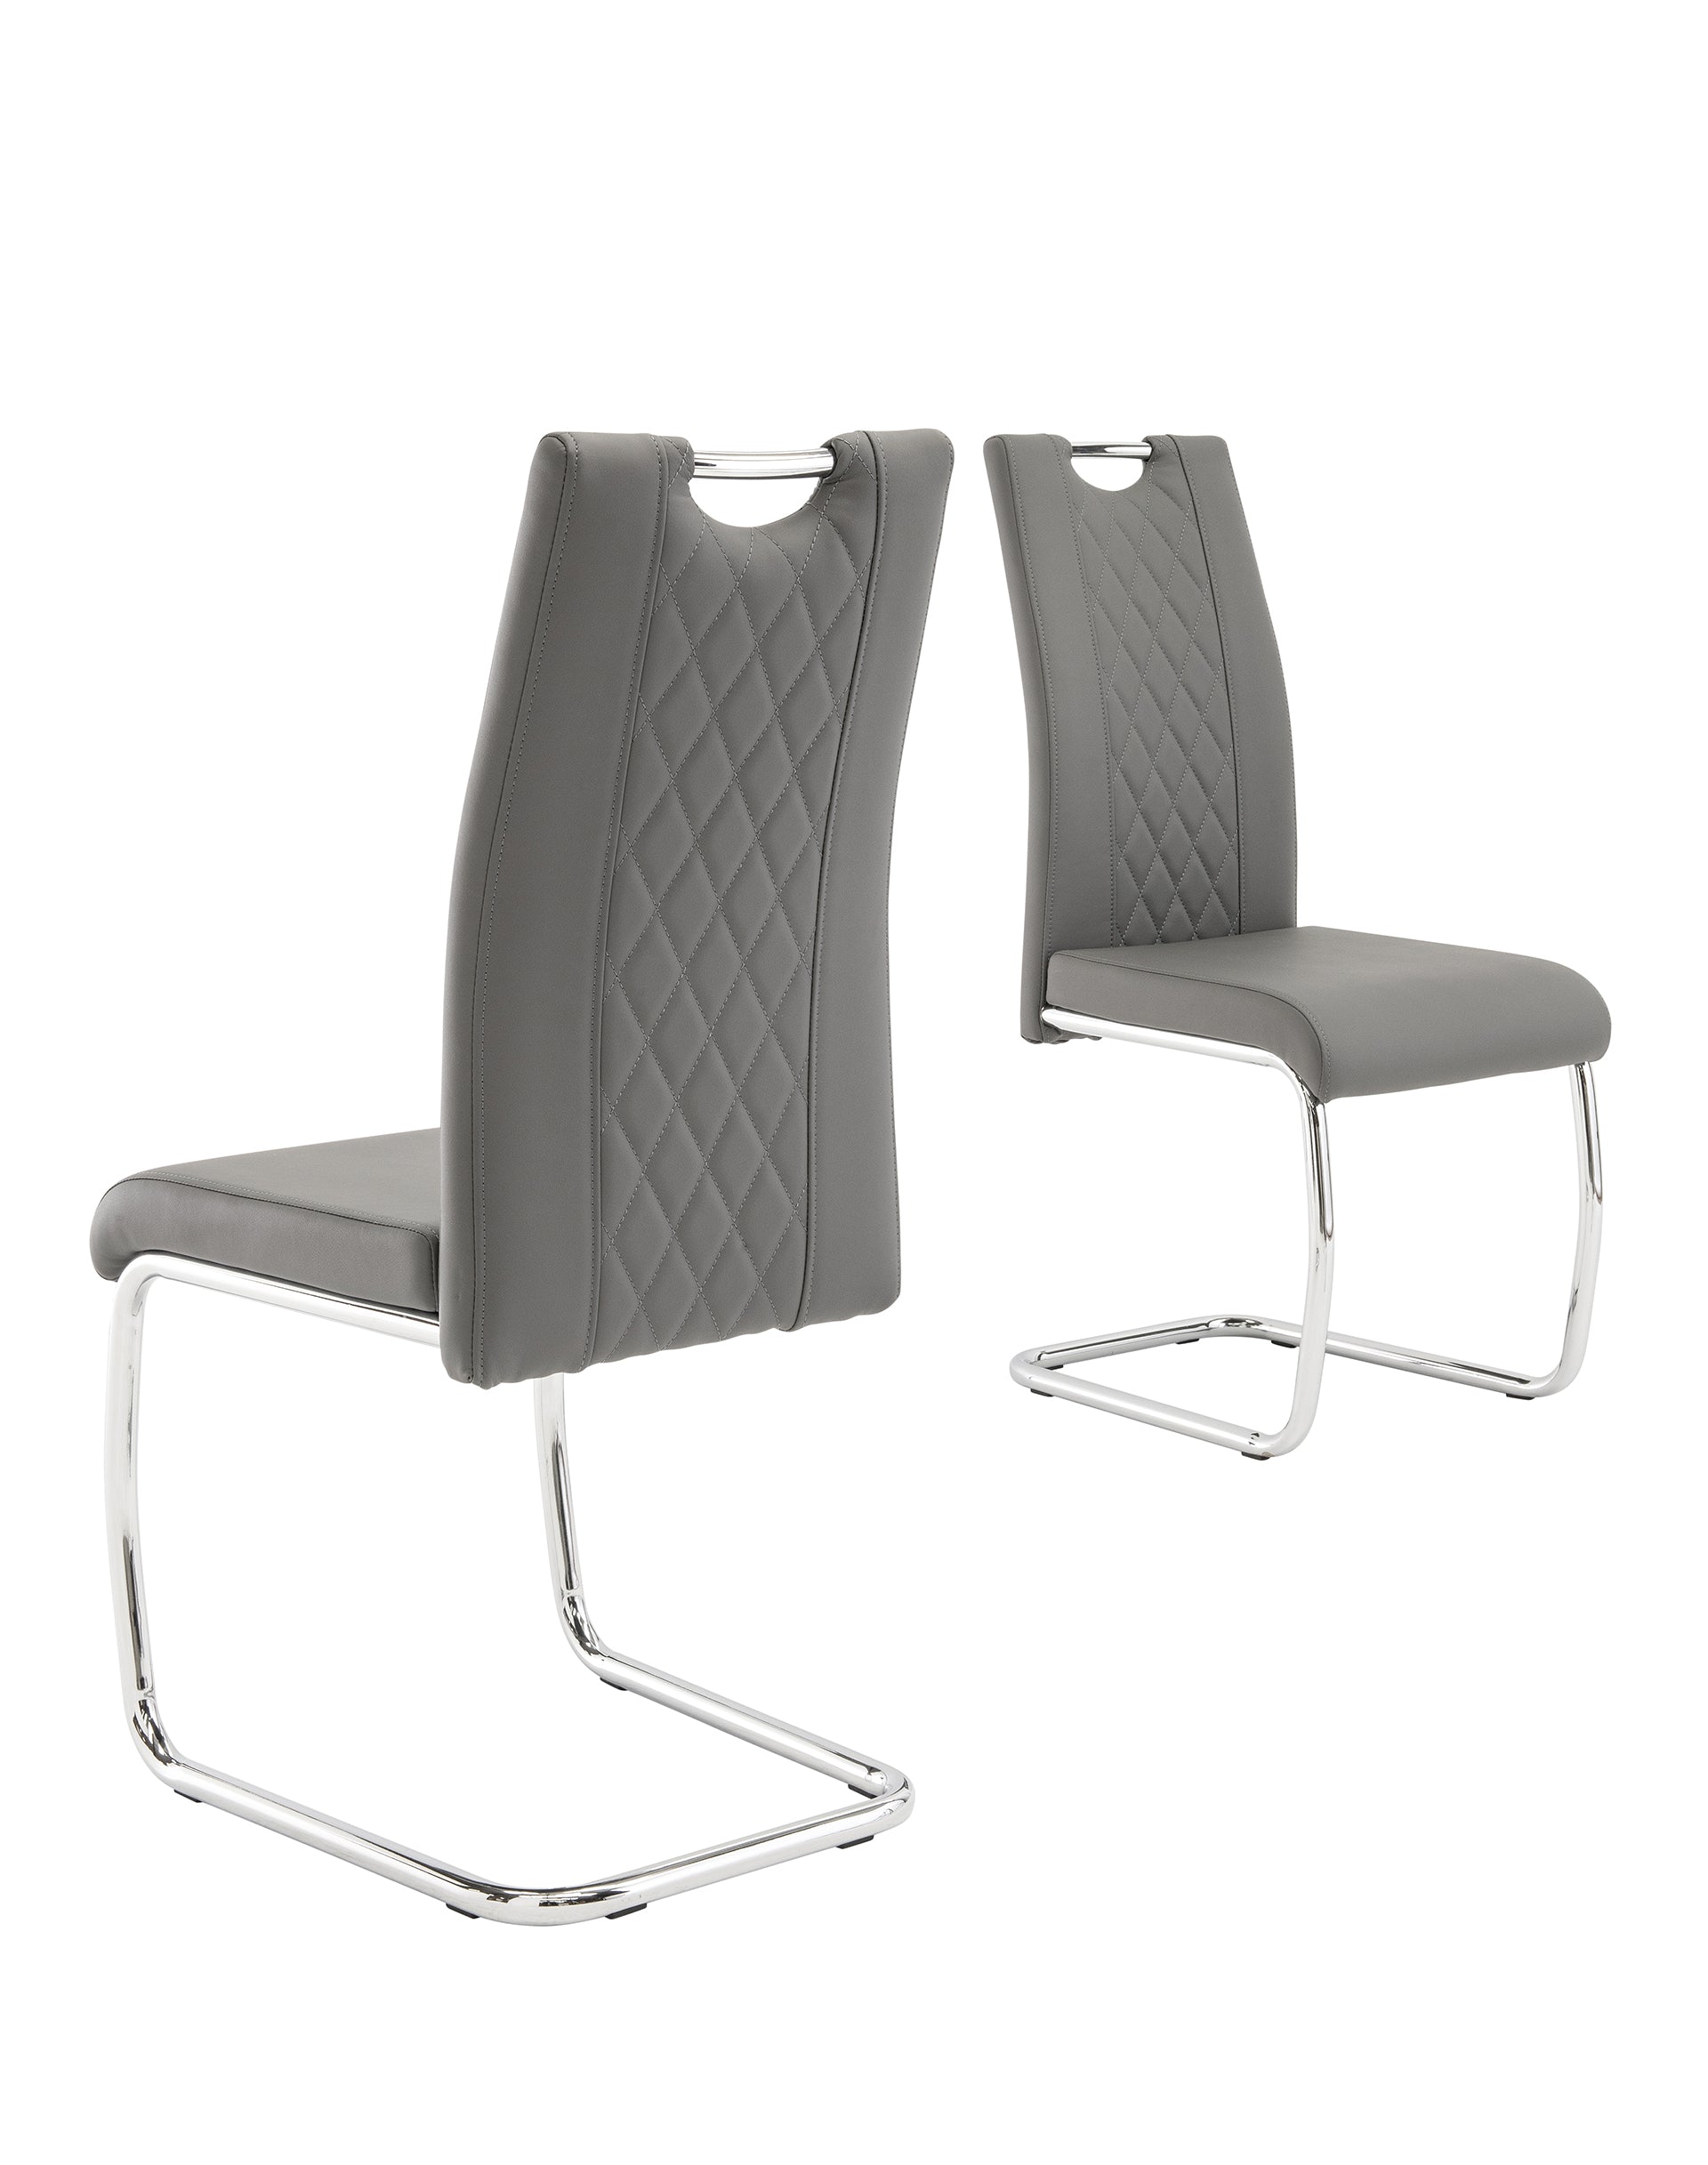 Ganley Pu with Chrome Canitlever Base Dining Chair (Pairs)